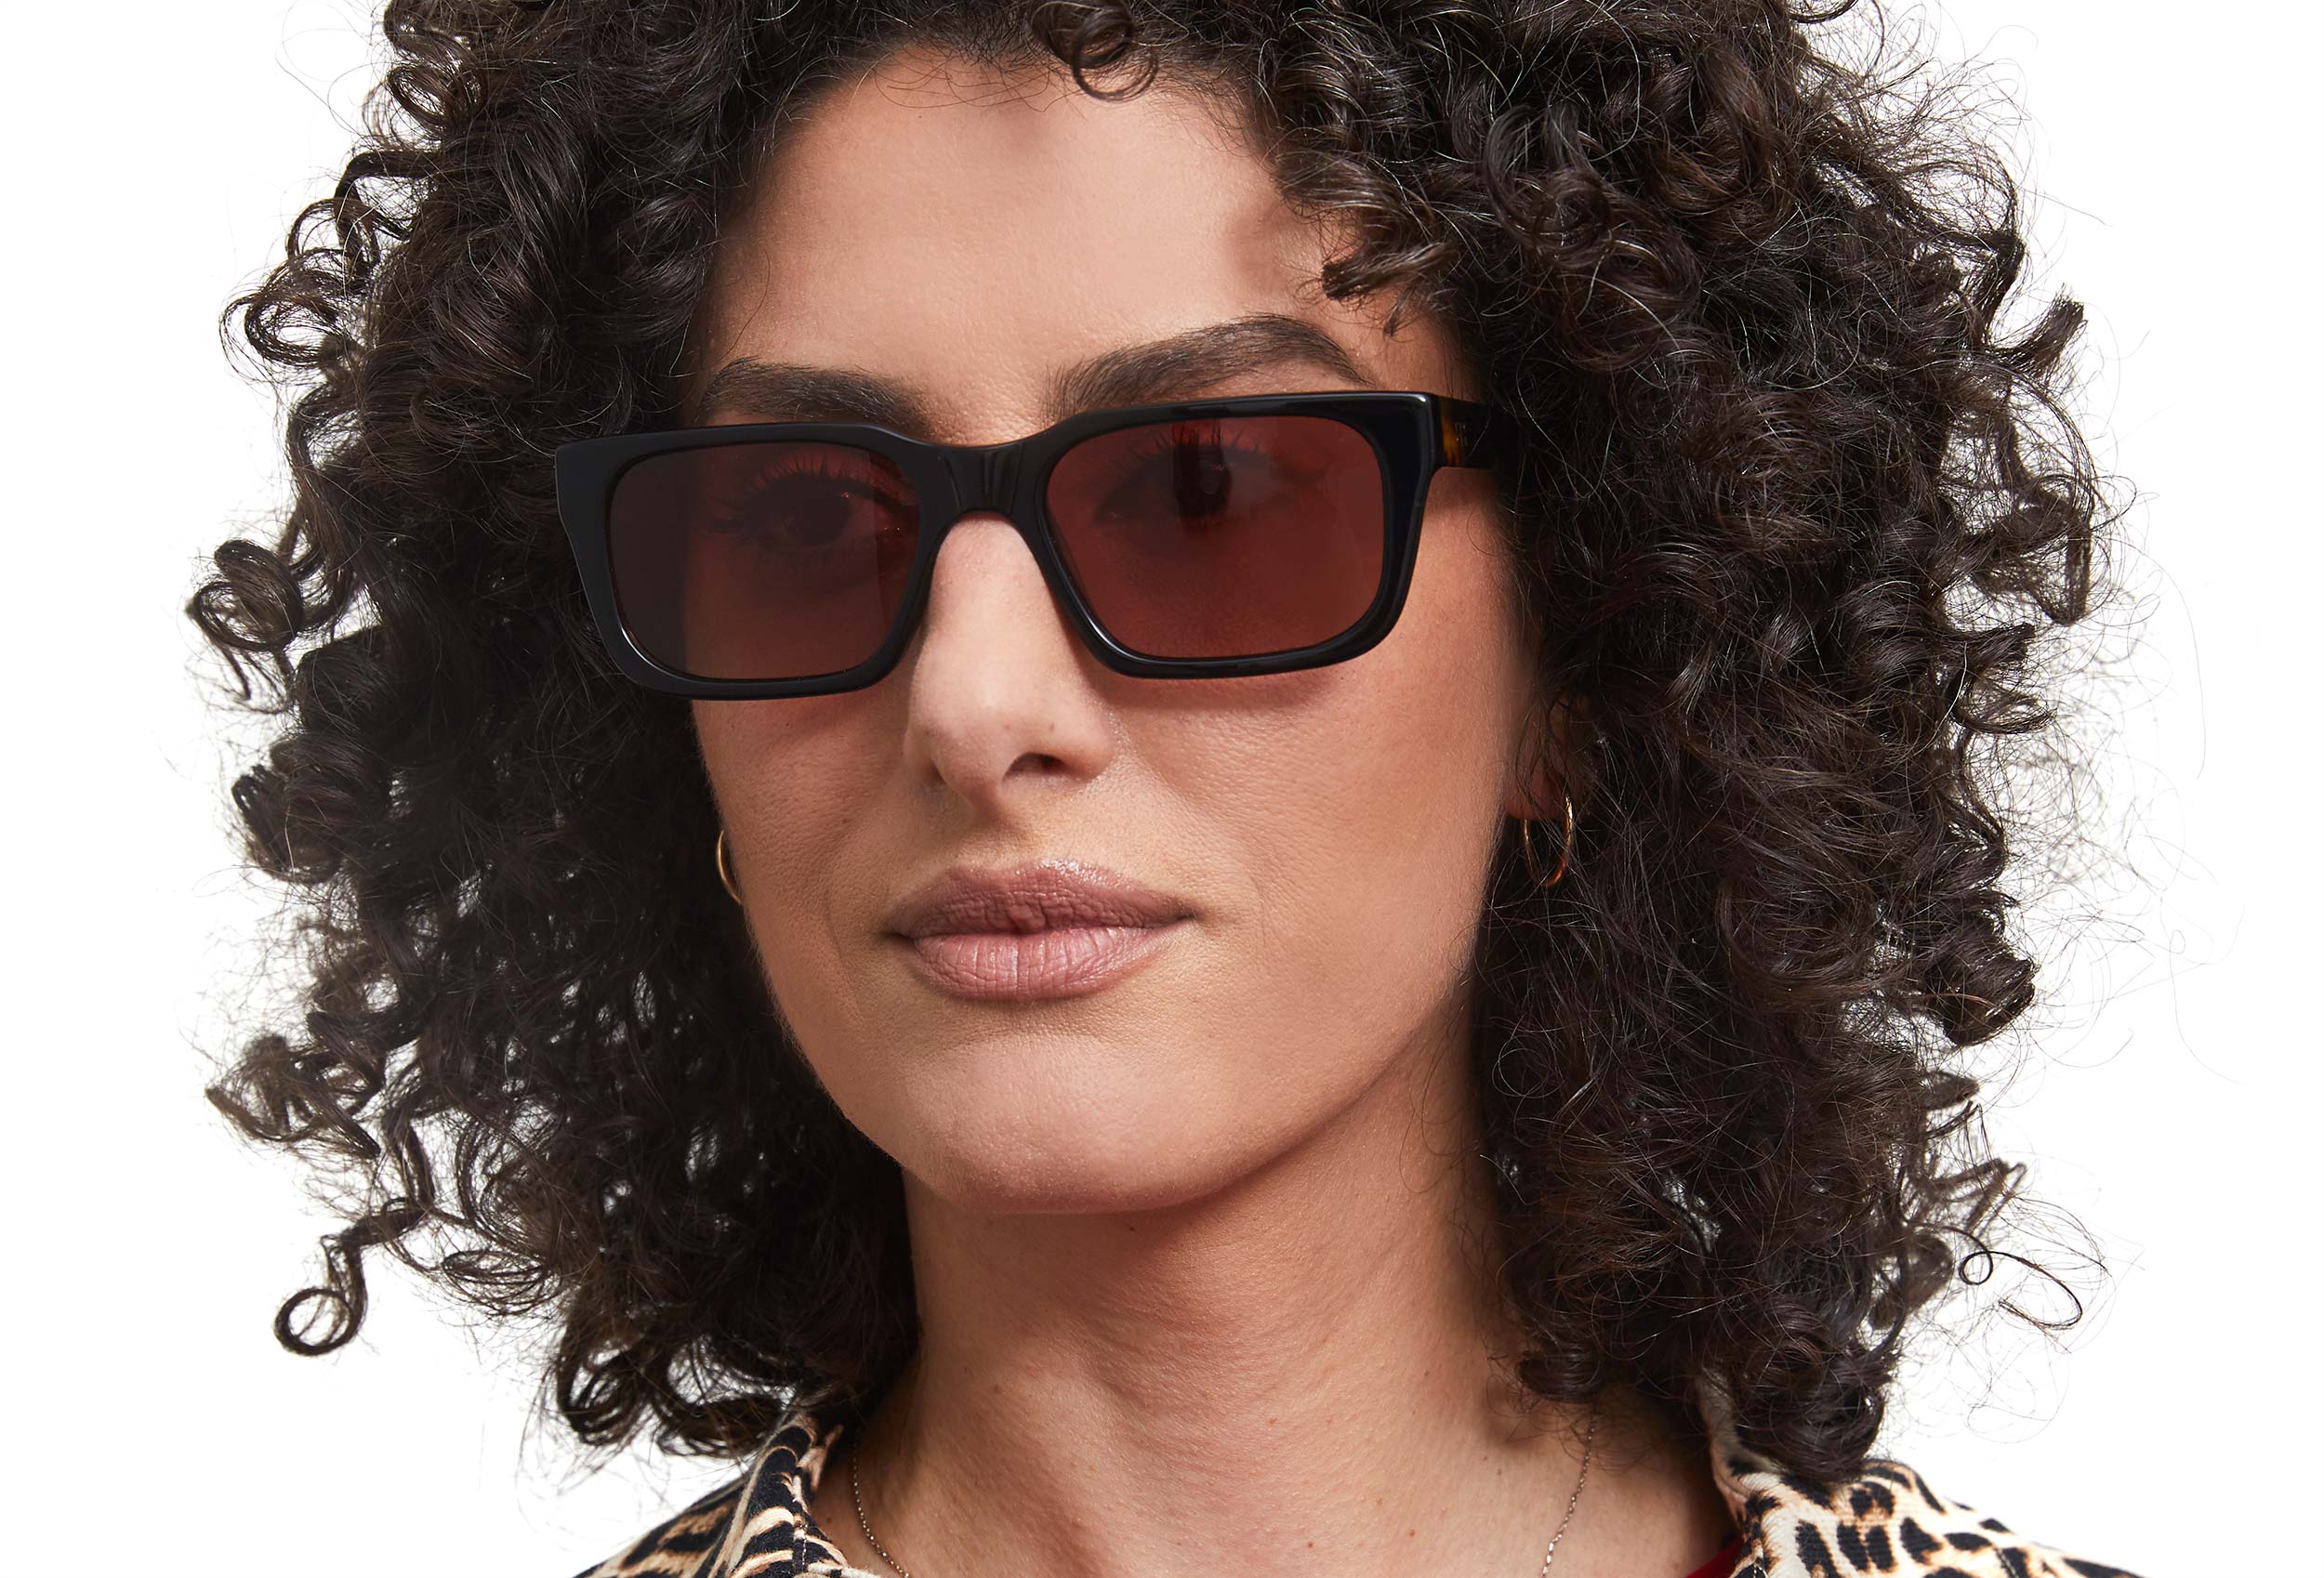 Photo of a man or woman wearing Victoire Sun Cognac Sun Glasses by French Kiwis